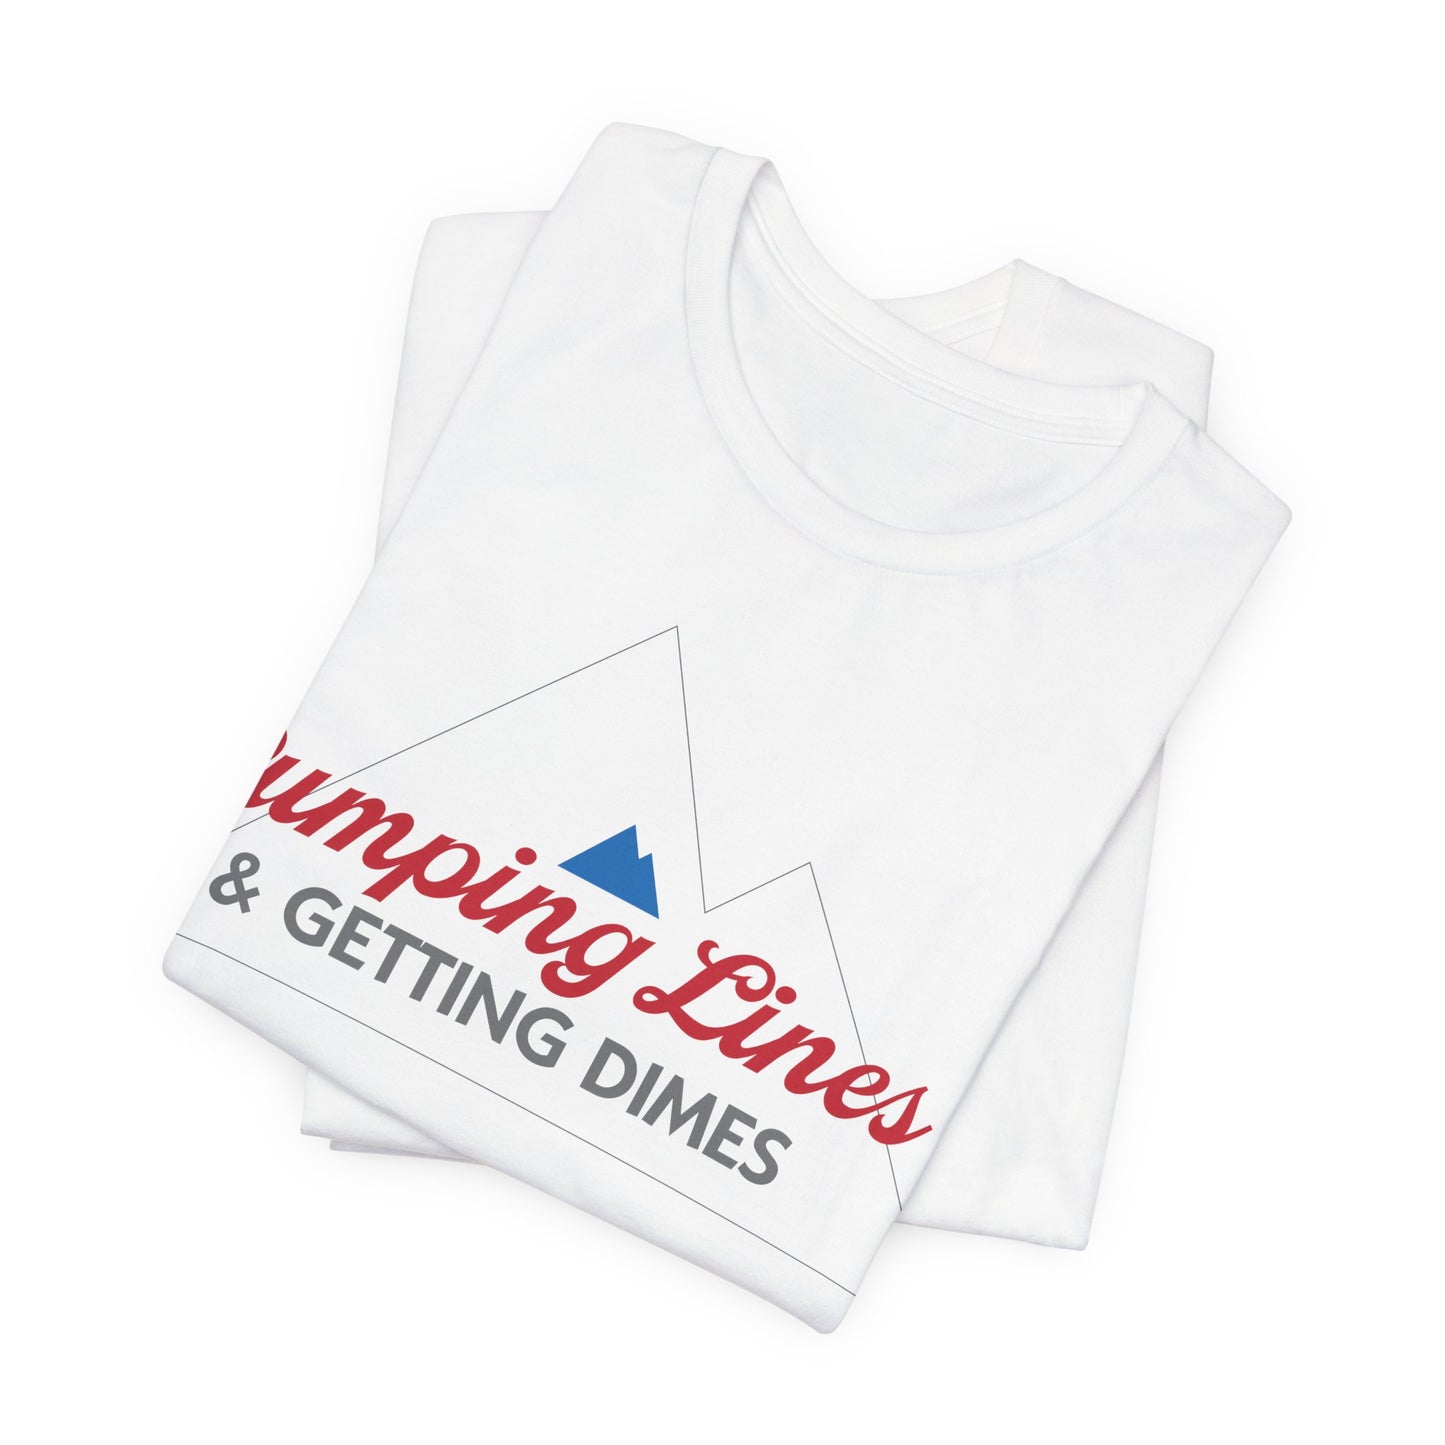 Pumping Lines & Getting Dimes Tee